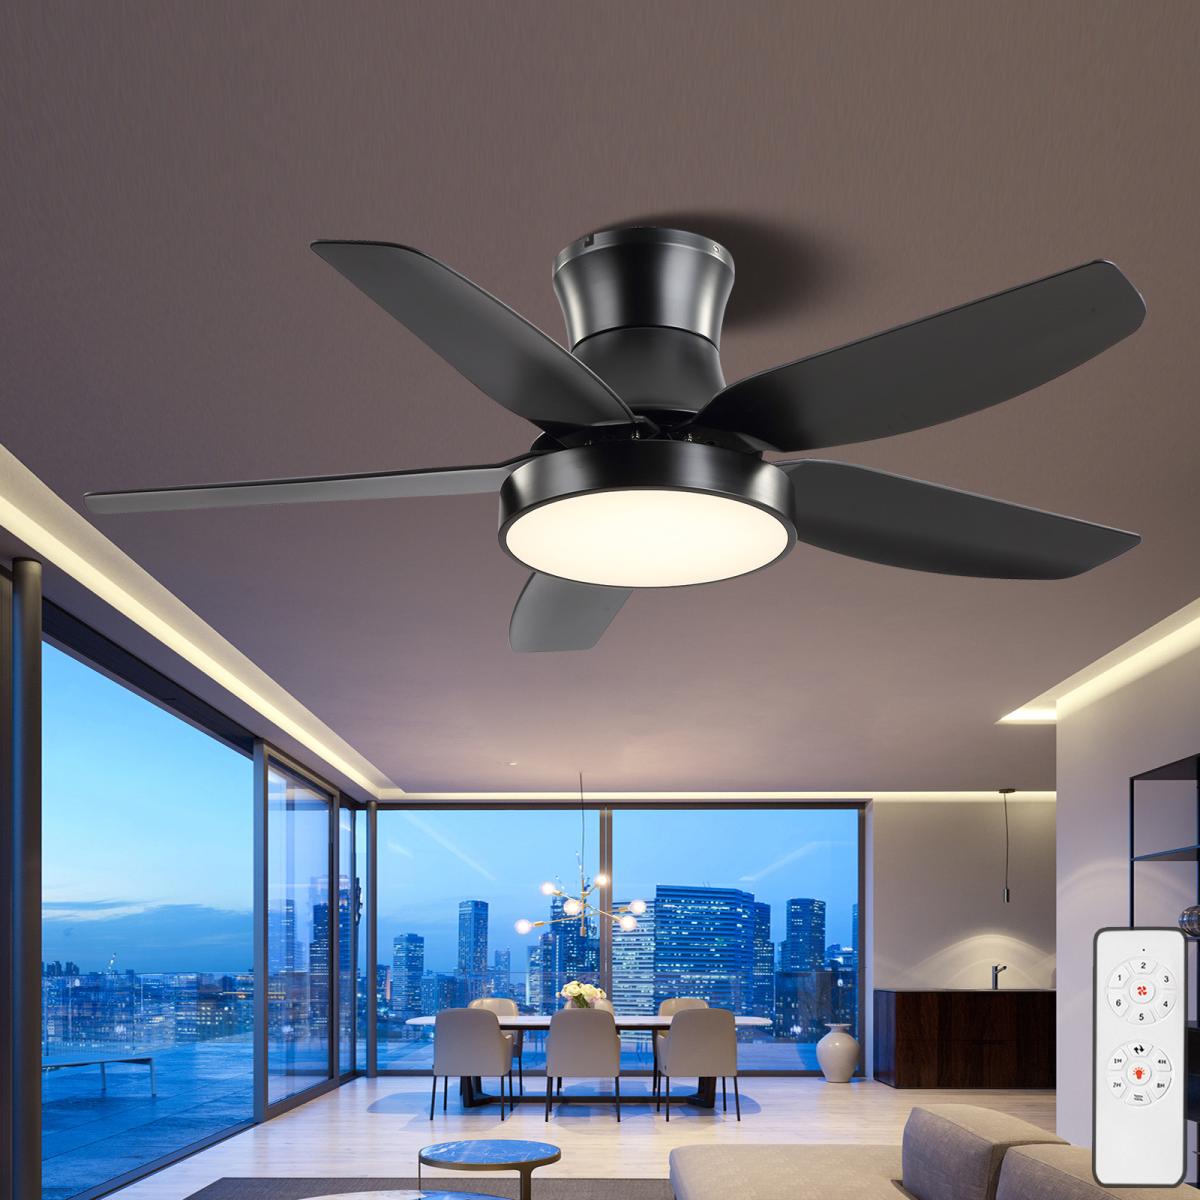 46 Inch Black Flush Mount Ceiling Fan with Light and Remote Control, Low Profile Ceiling Fan with 5 blades, 3 Light Color, 6 Speeds for Living Room, Bedroom, Children room, Matte Black